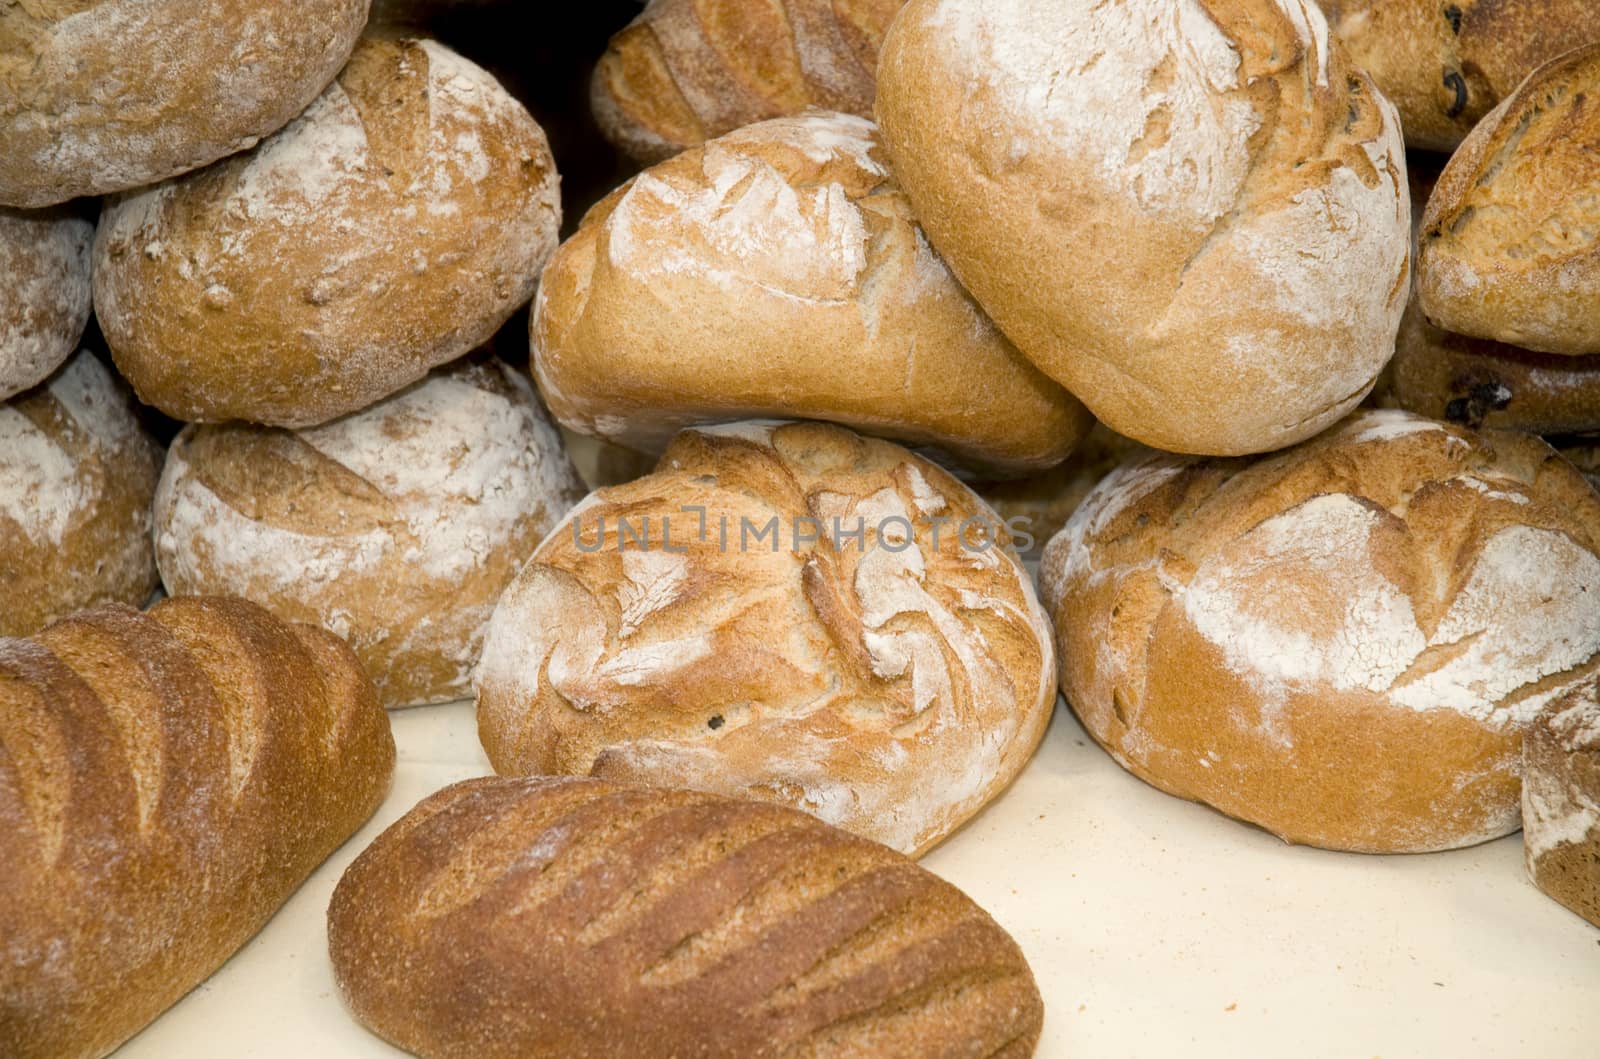 A pile of bread loaves for sale